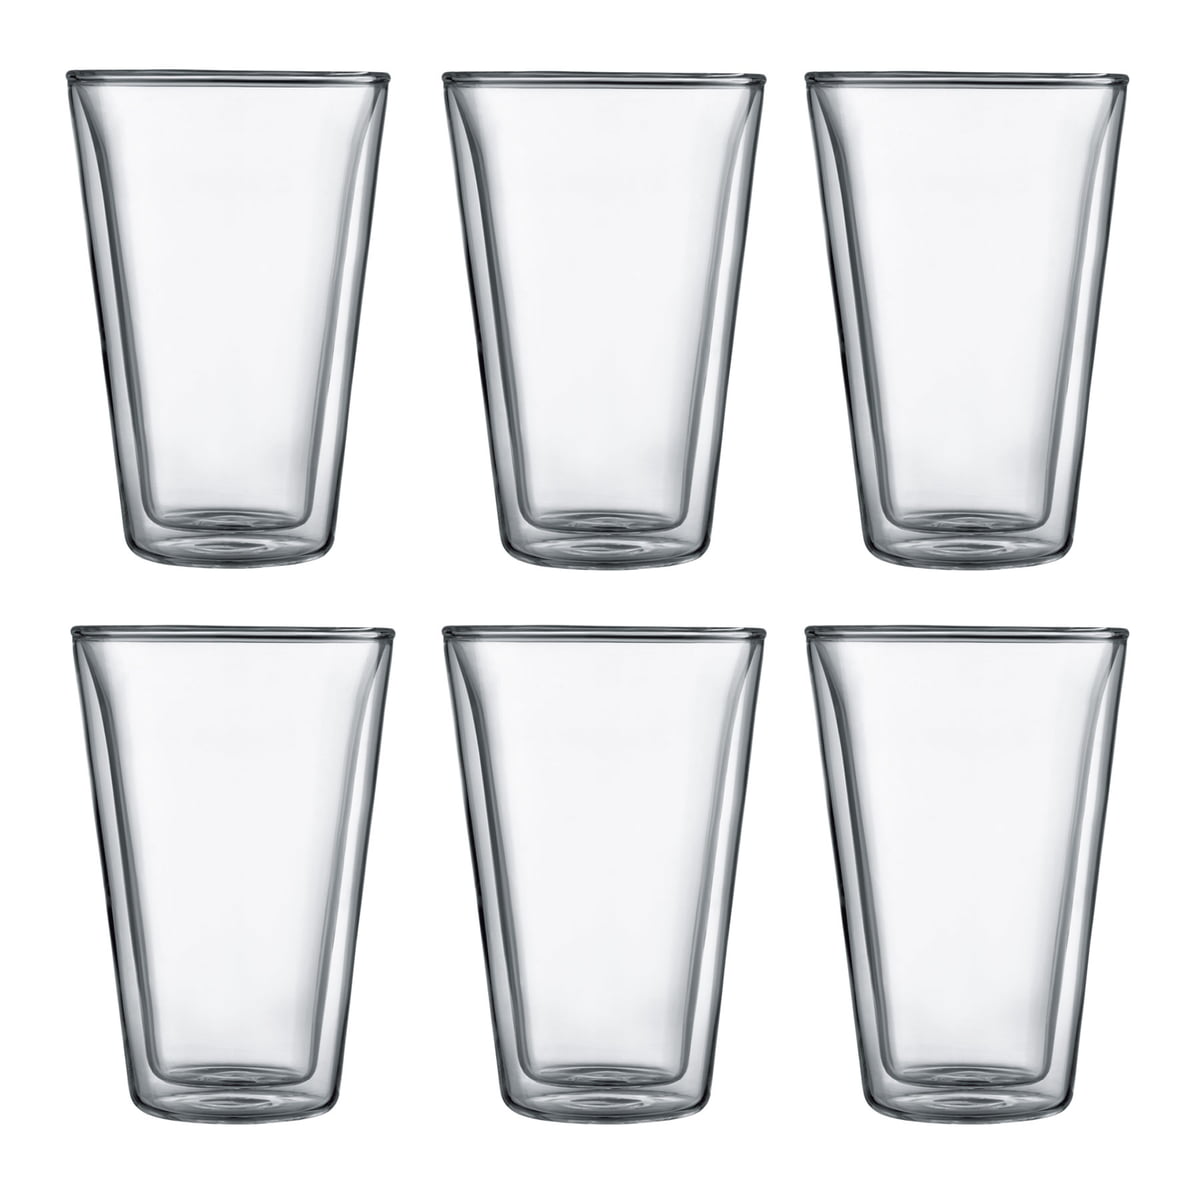 Buy Canteen Glasses Set by the shop